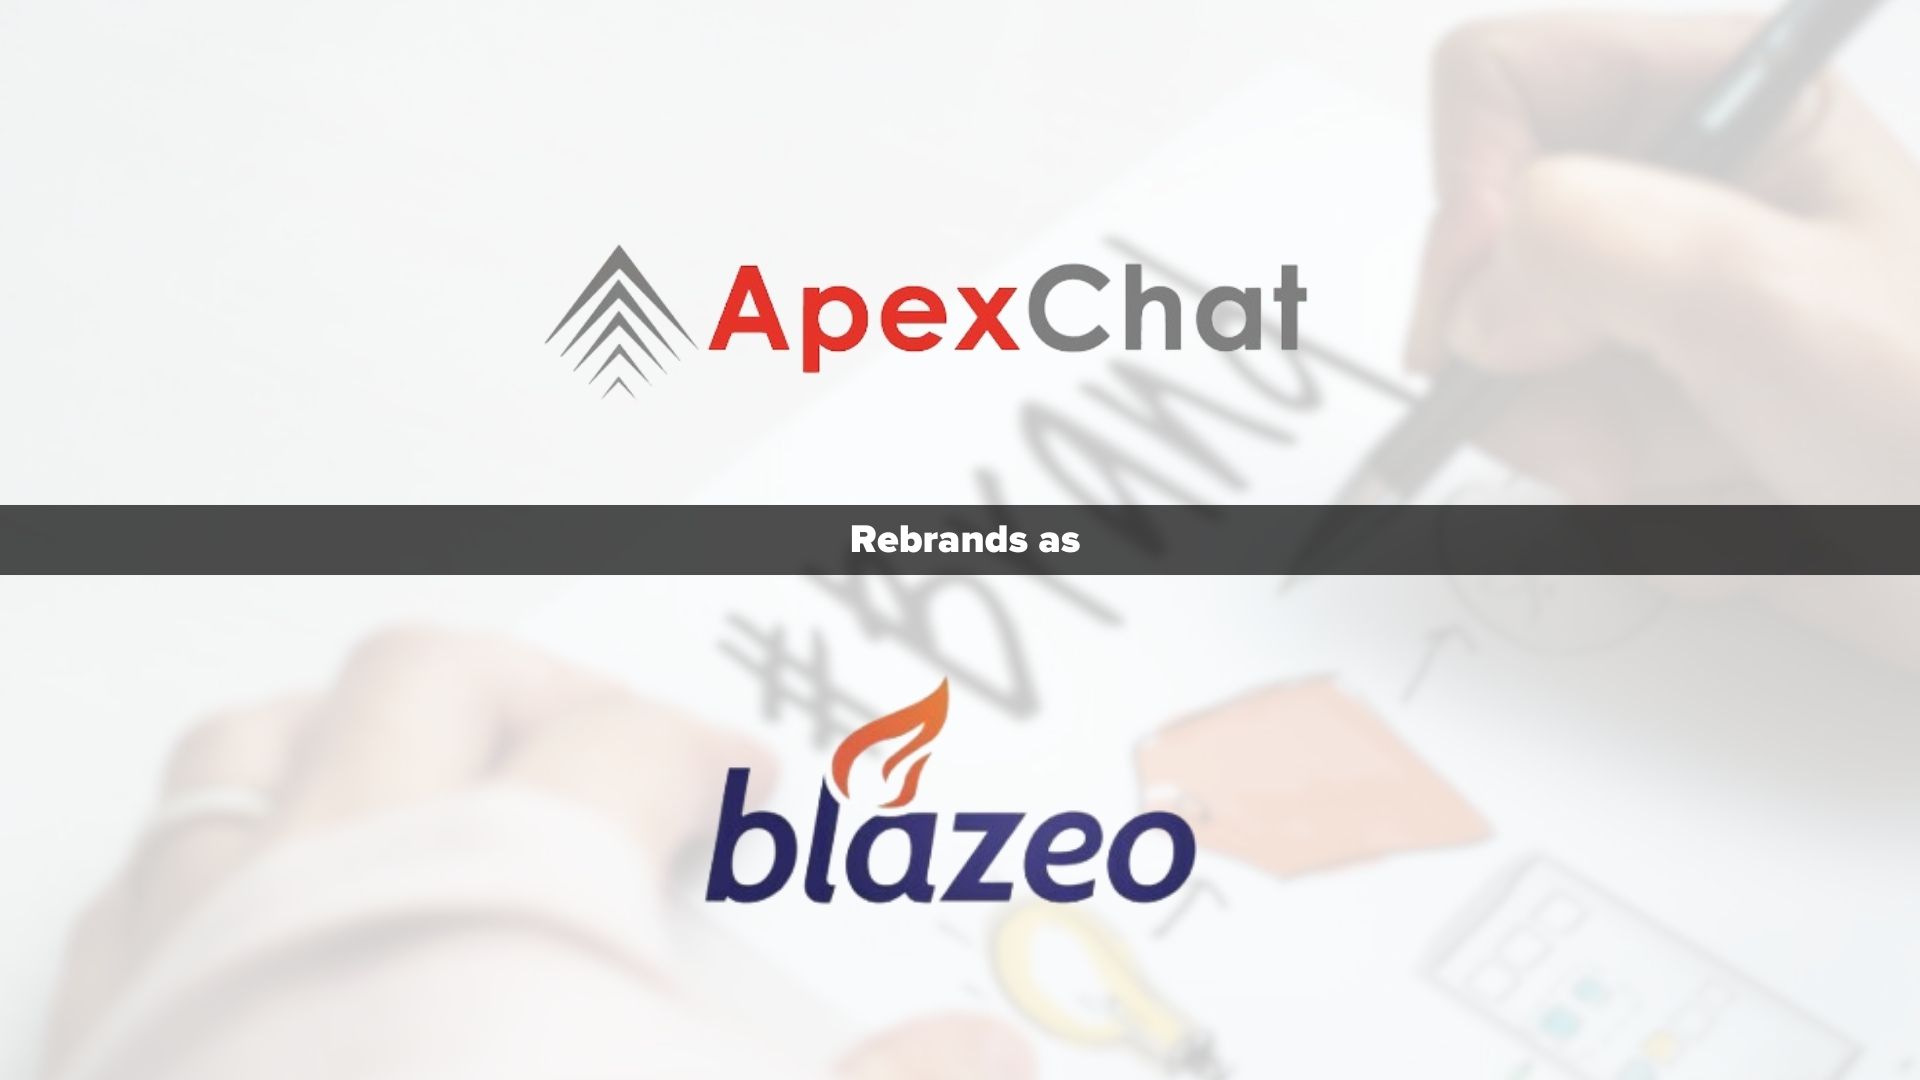 ApexChat Rebrands as Blazeo™, Reflecting its Expansion into an Ad Conversion Platform Laser-Focused on Helping Local Businesses Thrive